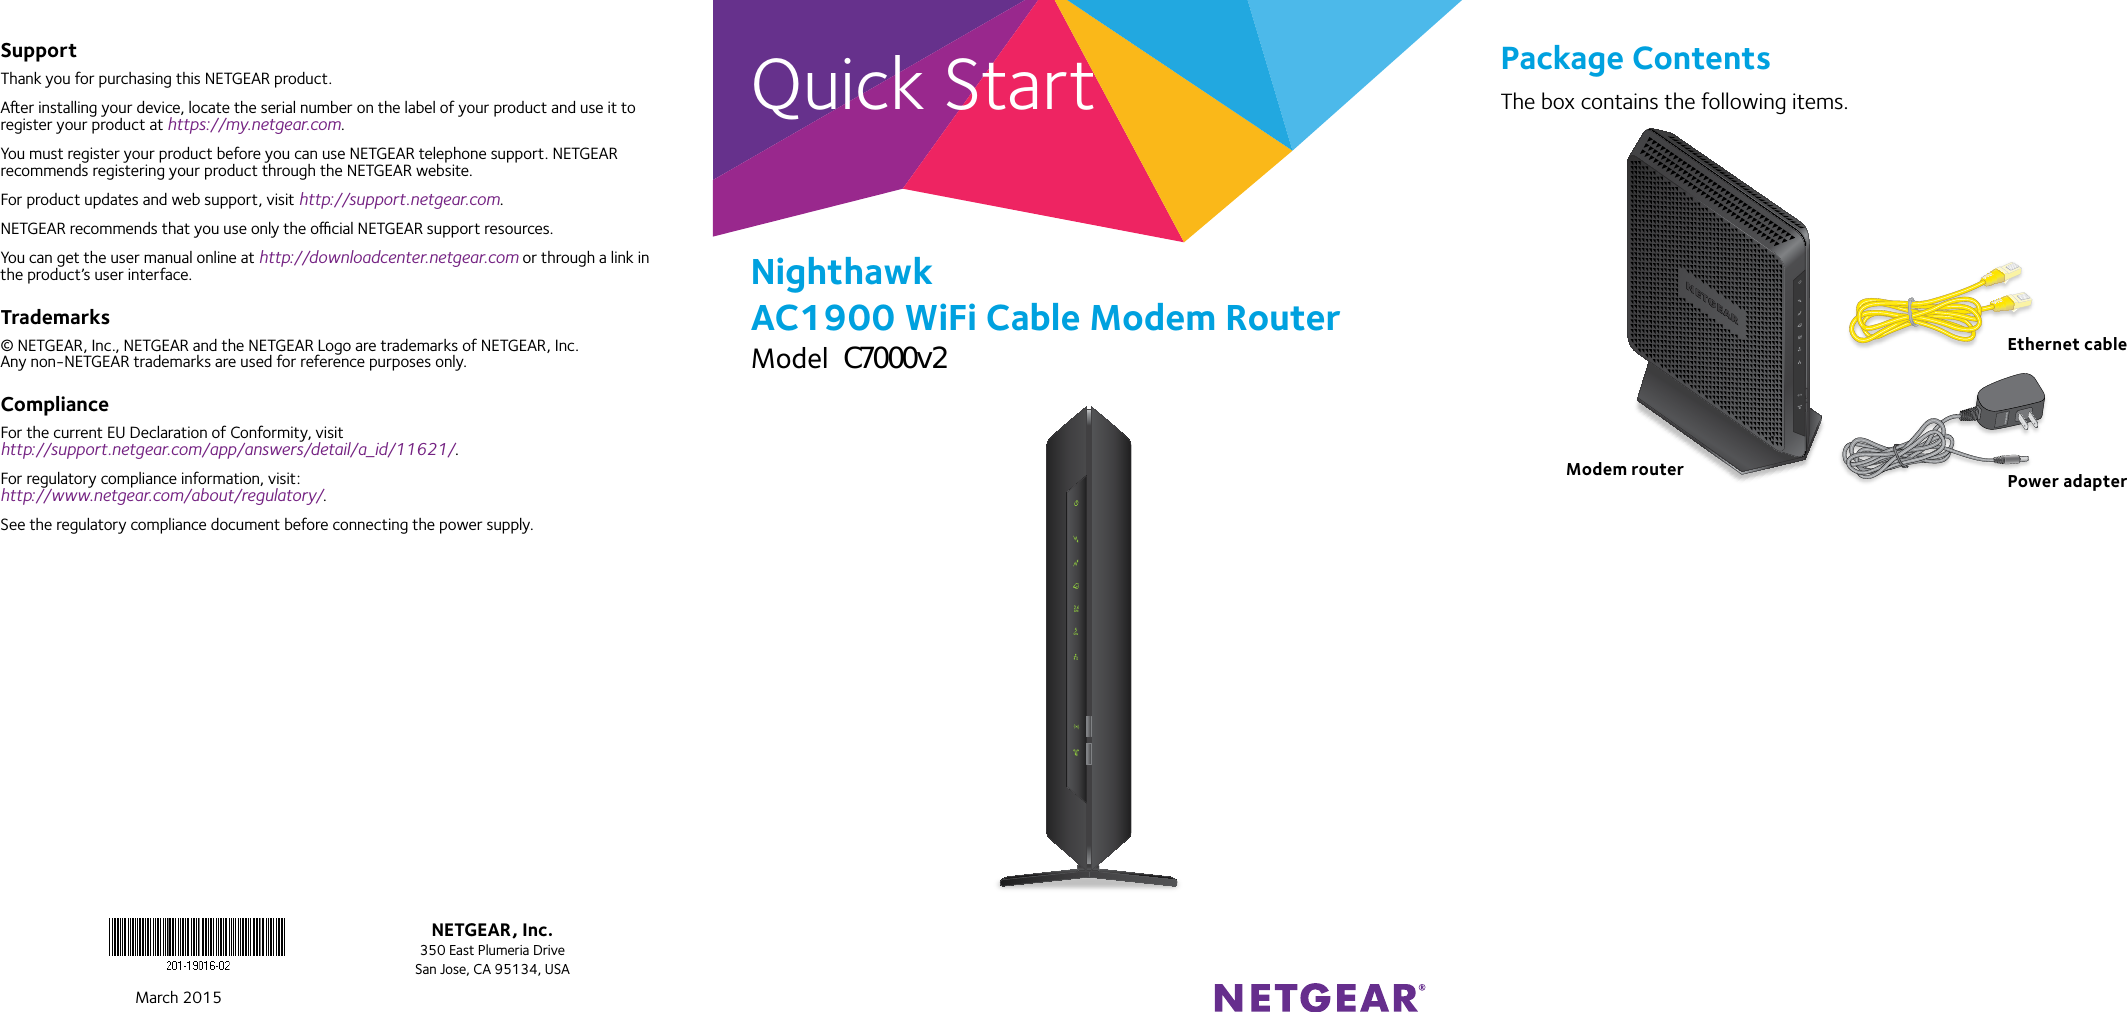 Quick StartNighthawk AC1900 WiFi Cable Modem RouterModel C7000Package ContentsThe box contains the following items.Modem routerEthernet cablePower adapterMarch 2015NETGEAR, Inc.350 East Plumeria DriveSan Jose, CA 95134, USASupportThank you for purchasing this NETGEAR product.Aer installing your device, locate the serial number on the label of your product and use it to register your product at https://my.netgear.com. You must register your product before you can use NETGEAR telephone support. NETGEAR recommends registering your product through the NETGEAR website.For product updates and web support, visit http://support.netgear.com.NETGEAR recommends that you use only the ocial NETGEAR support resources. You can get the user manual online at http://downloadcenter.netgear.com or through a link in the product’s user interface.Trademarks© NETGEAR, Inc., NETGEAR and the NETGEAR Logo are trademarks of NETGEAR, Inc.  Any non‑NETGEAR trademarks are used for reference purposes only.ComplianceFor the current EU Declaration of Conformity, visit  http://support.netgear.com/app/answers/detail/a_id/11621/. For regulatory compliance information, visit: http://www.netgear.com/about/regulatory/.See the regulatory compliance document before connecting the power supply. C7000v2